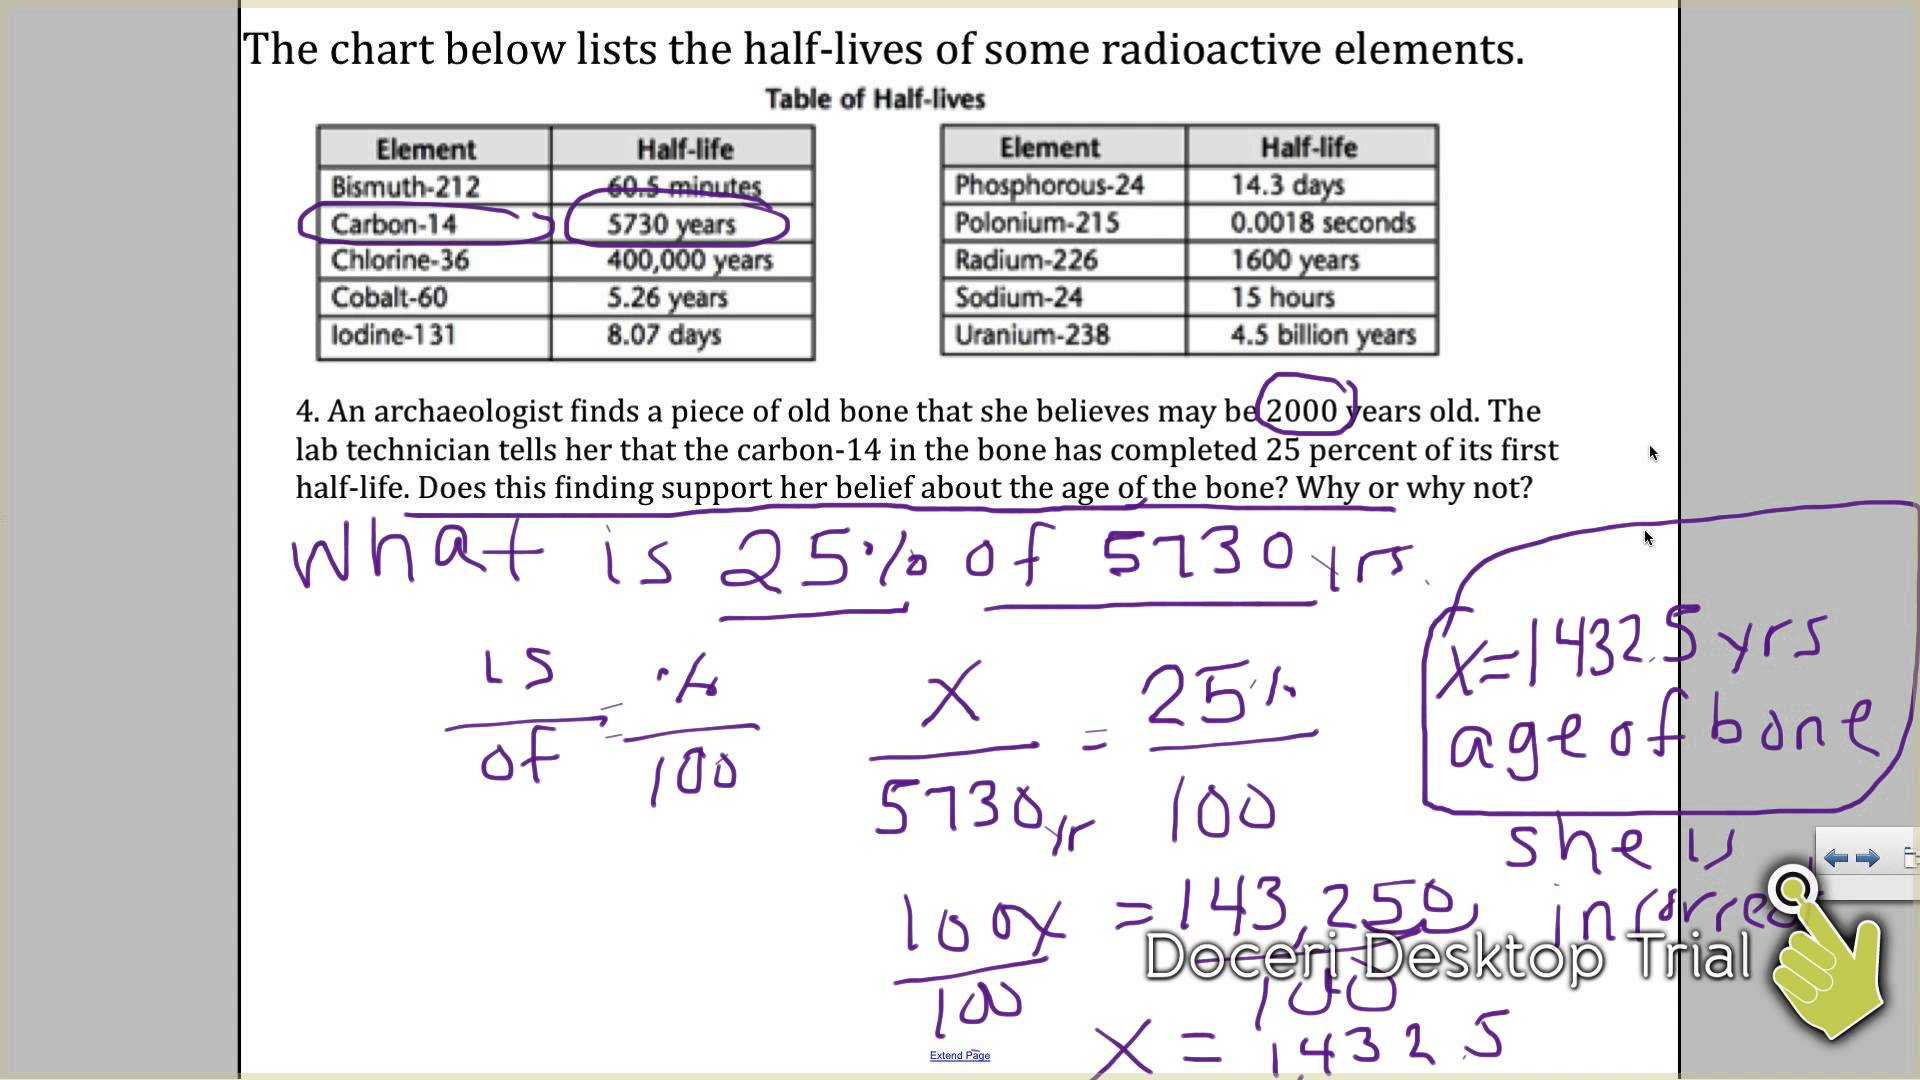 Relative Dating Worksheet Pdf Along with Radioactive Decay and Half Life Worksheet Answers Choice Image